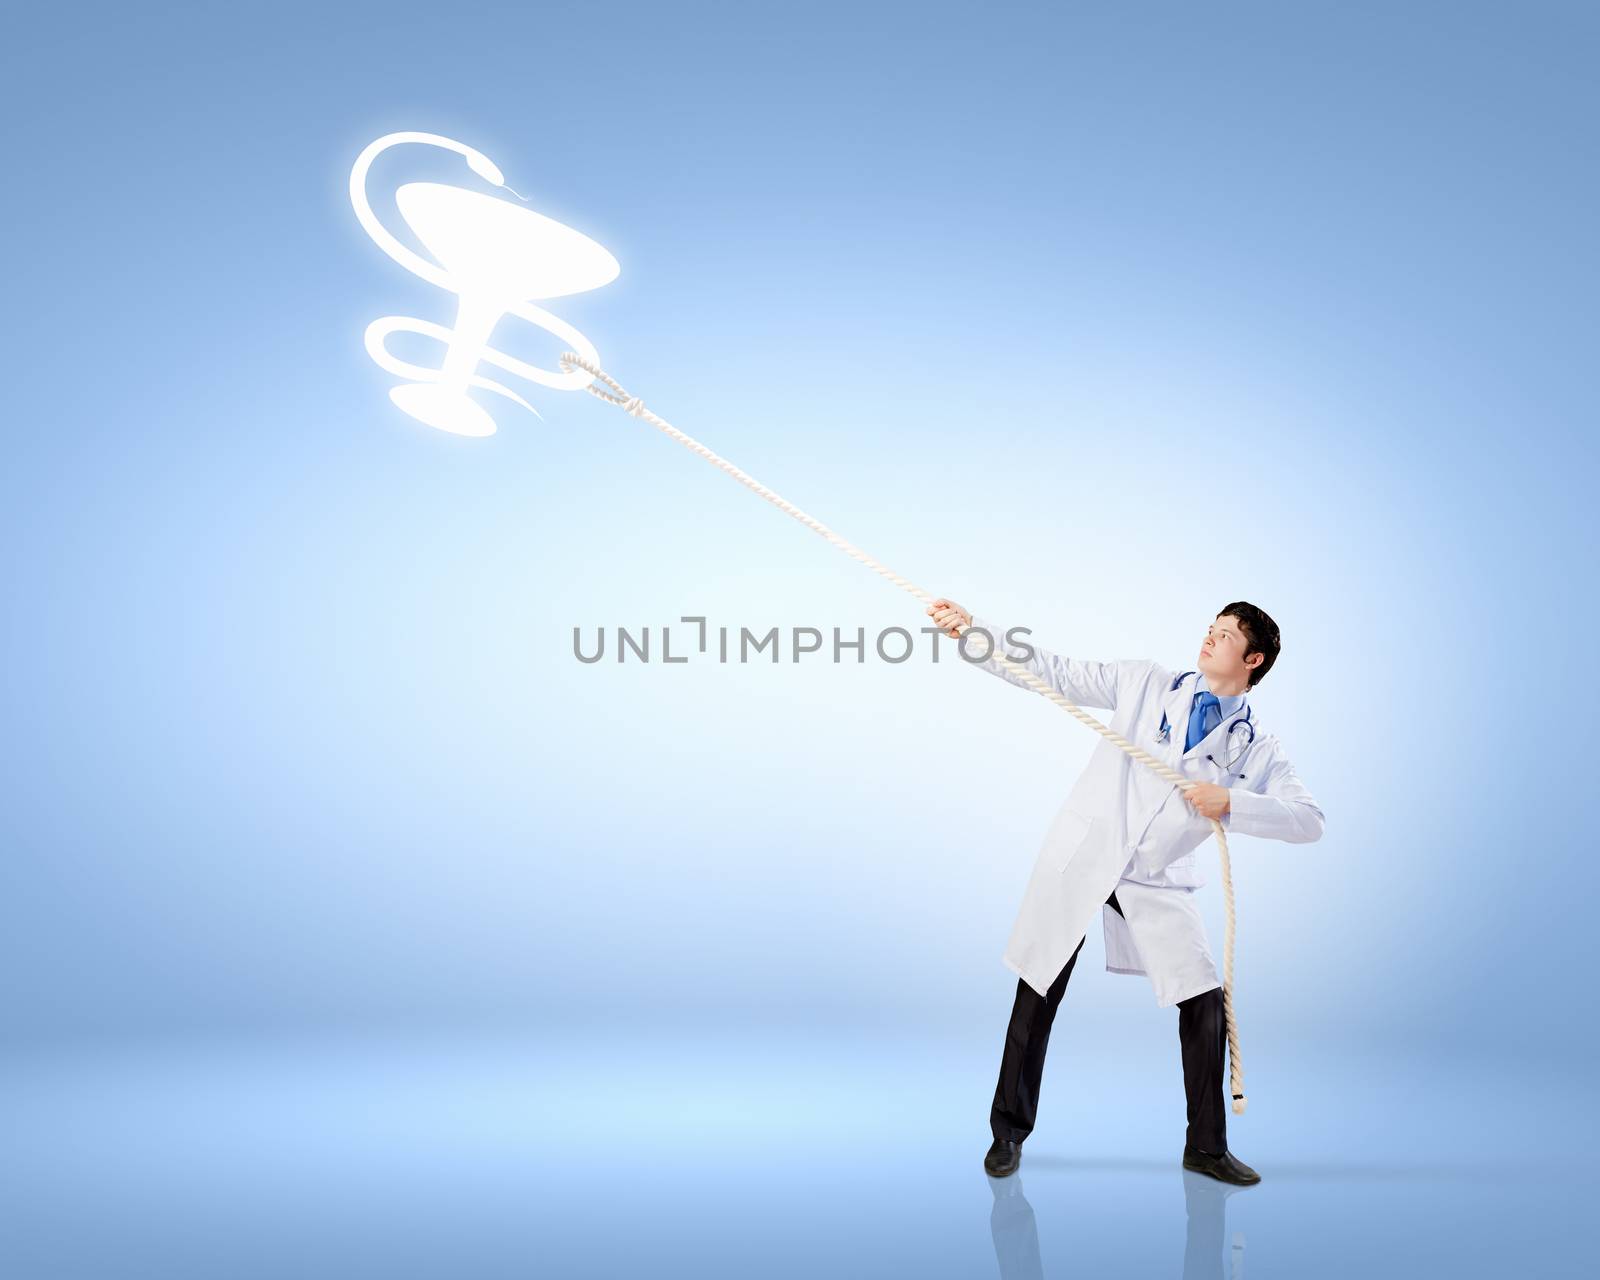 Image of male doctor pulling health sign with rope